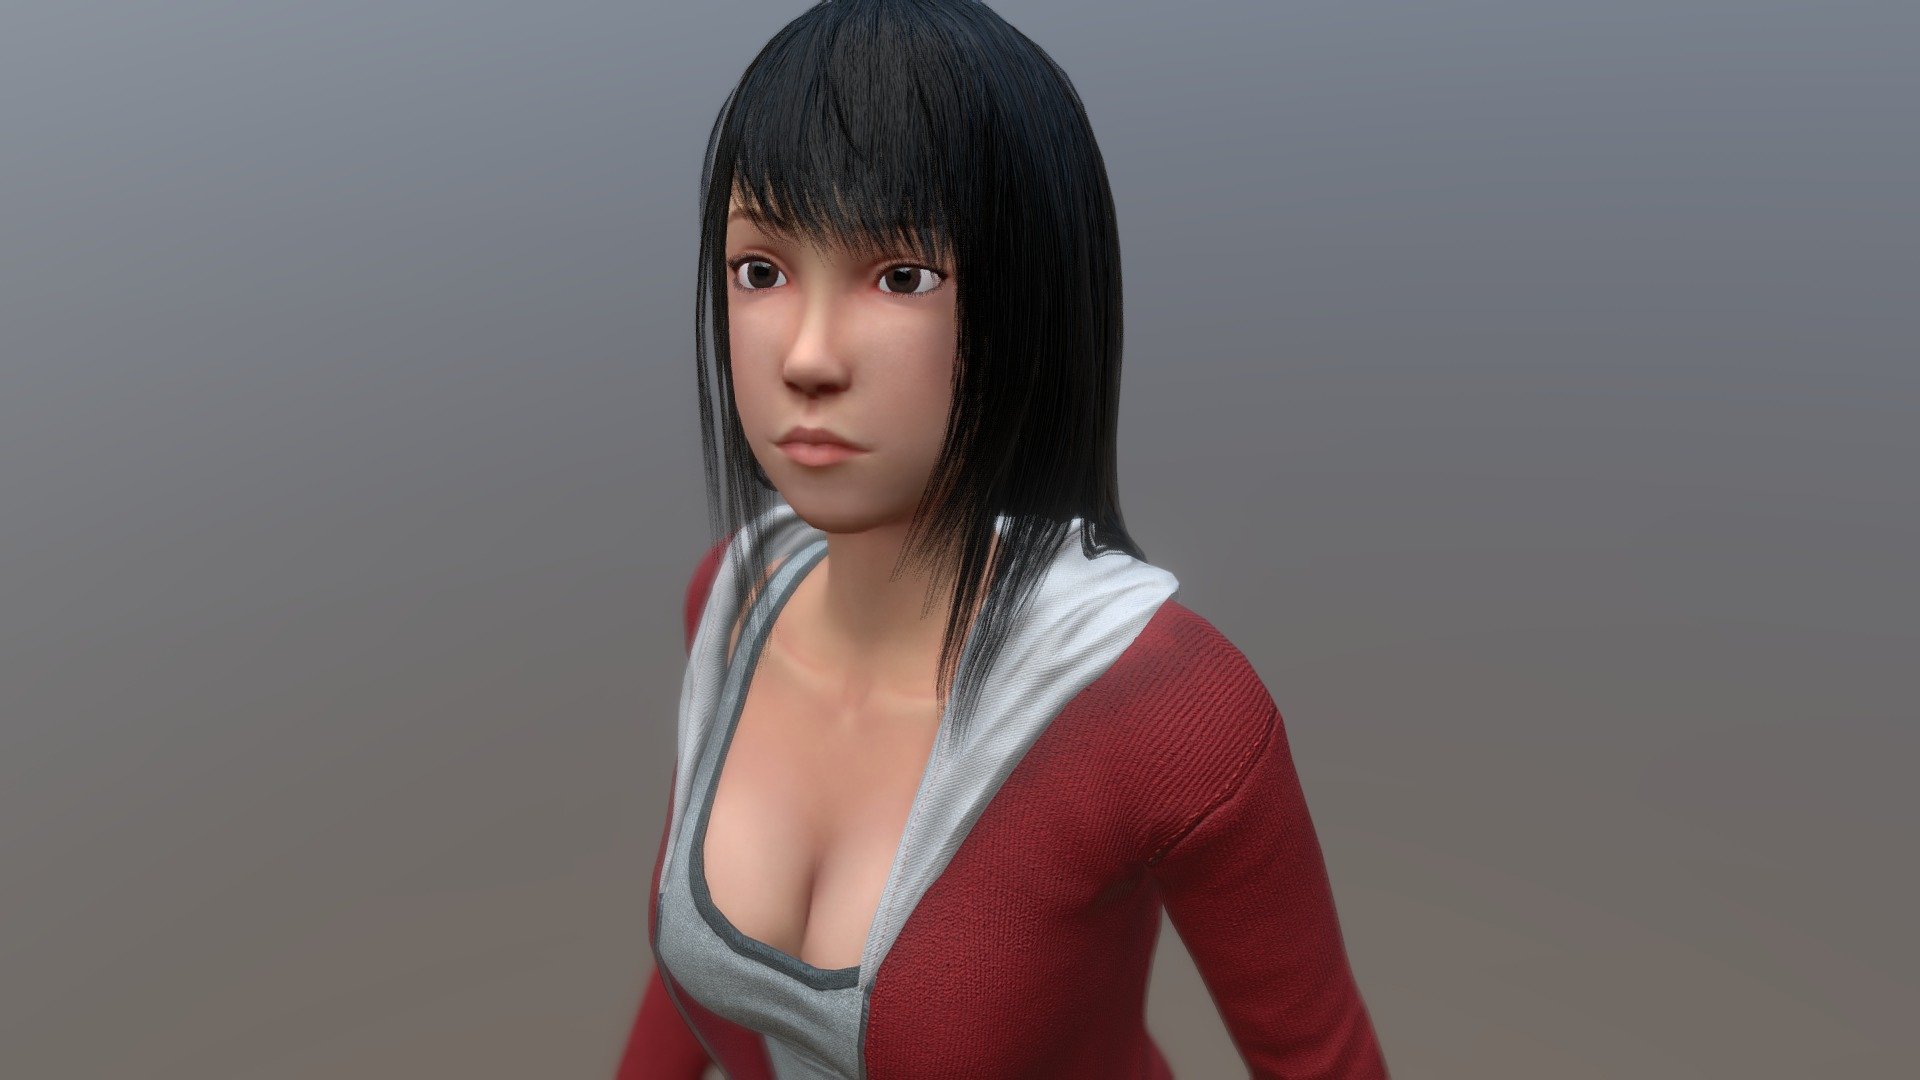 Marisa from Araya Horror Game in Steam for Practice my model skill.
Texture is not completely yet so i will be improve texture skill another work :) - Red Sweater Girl - 3D model by BankmanGameAsset (@Asakura1984) 3d model